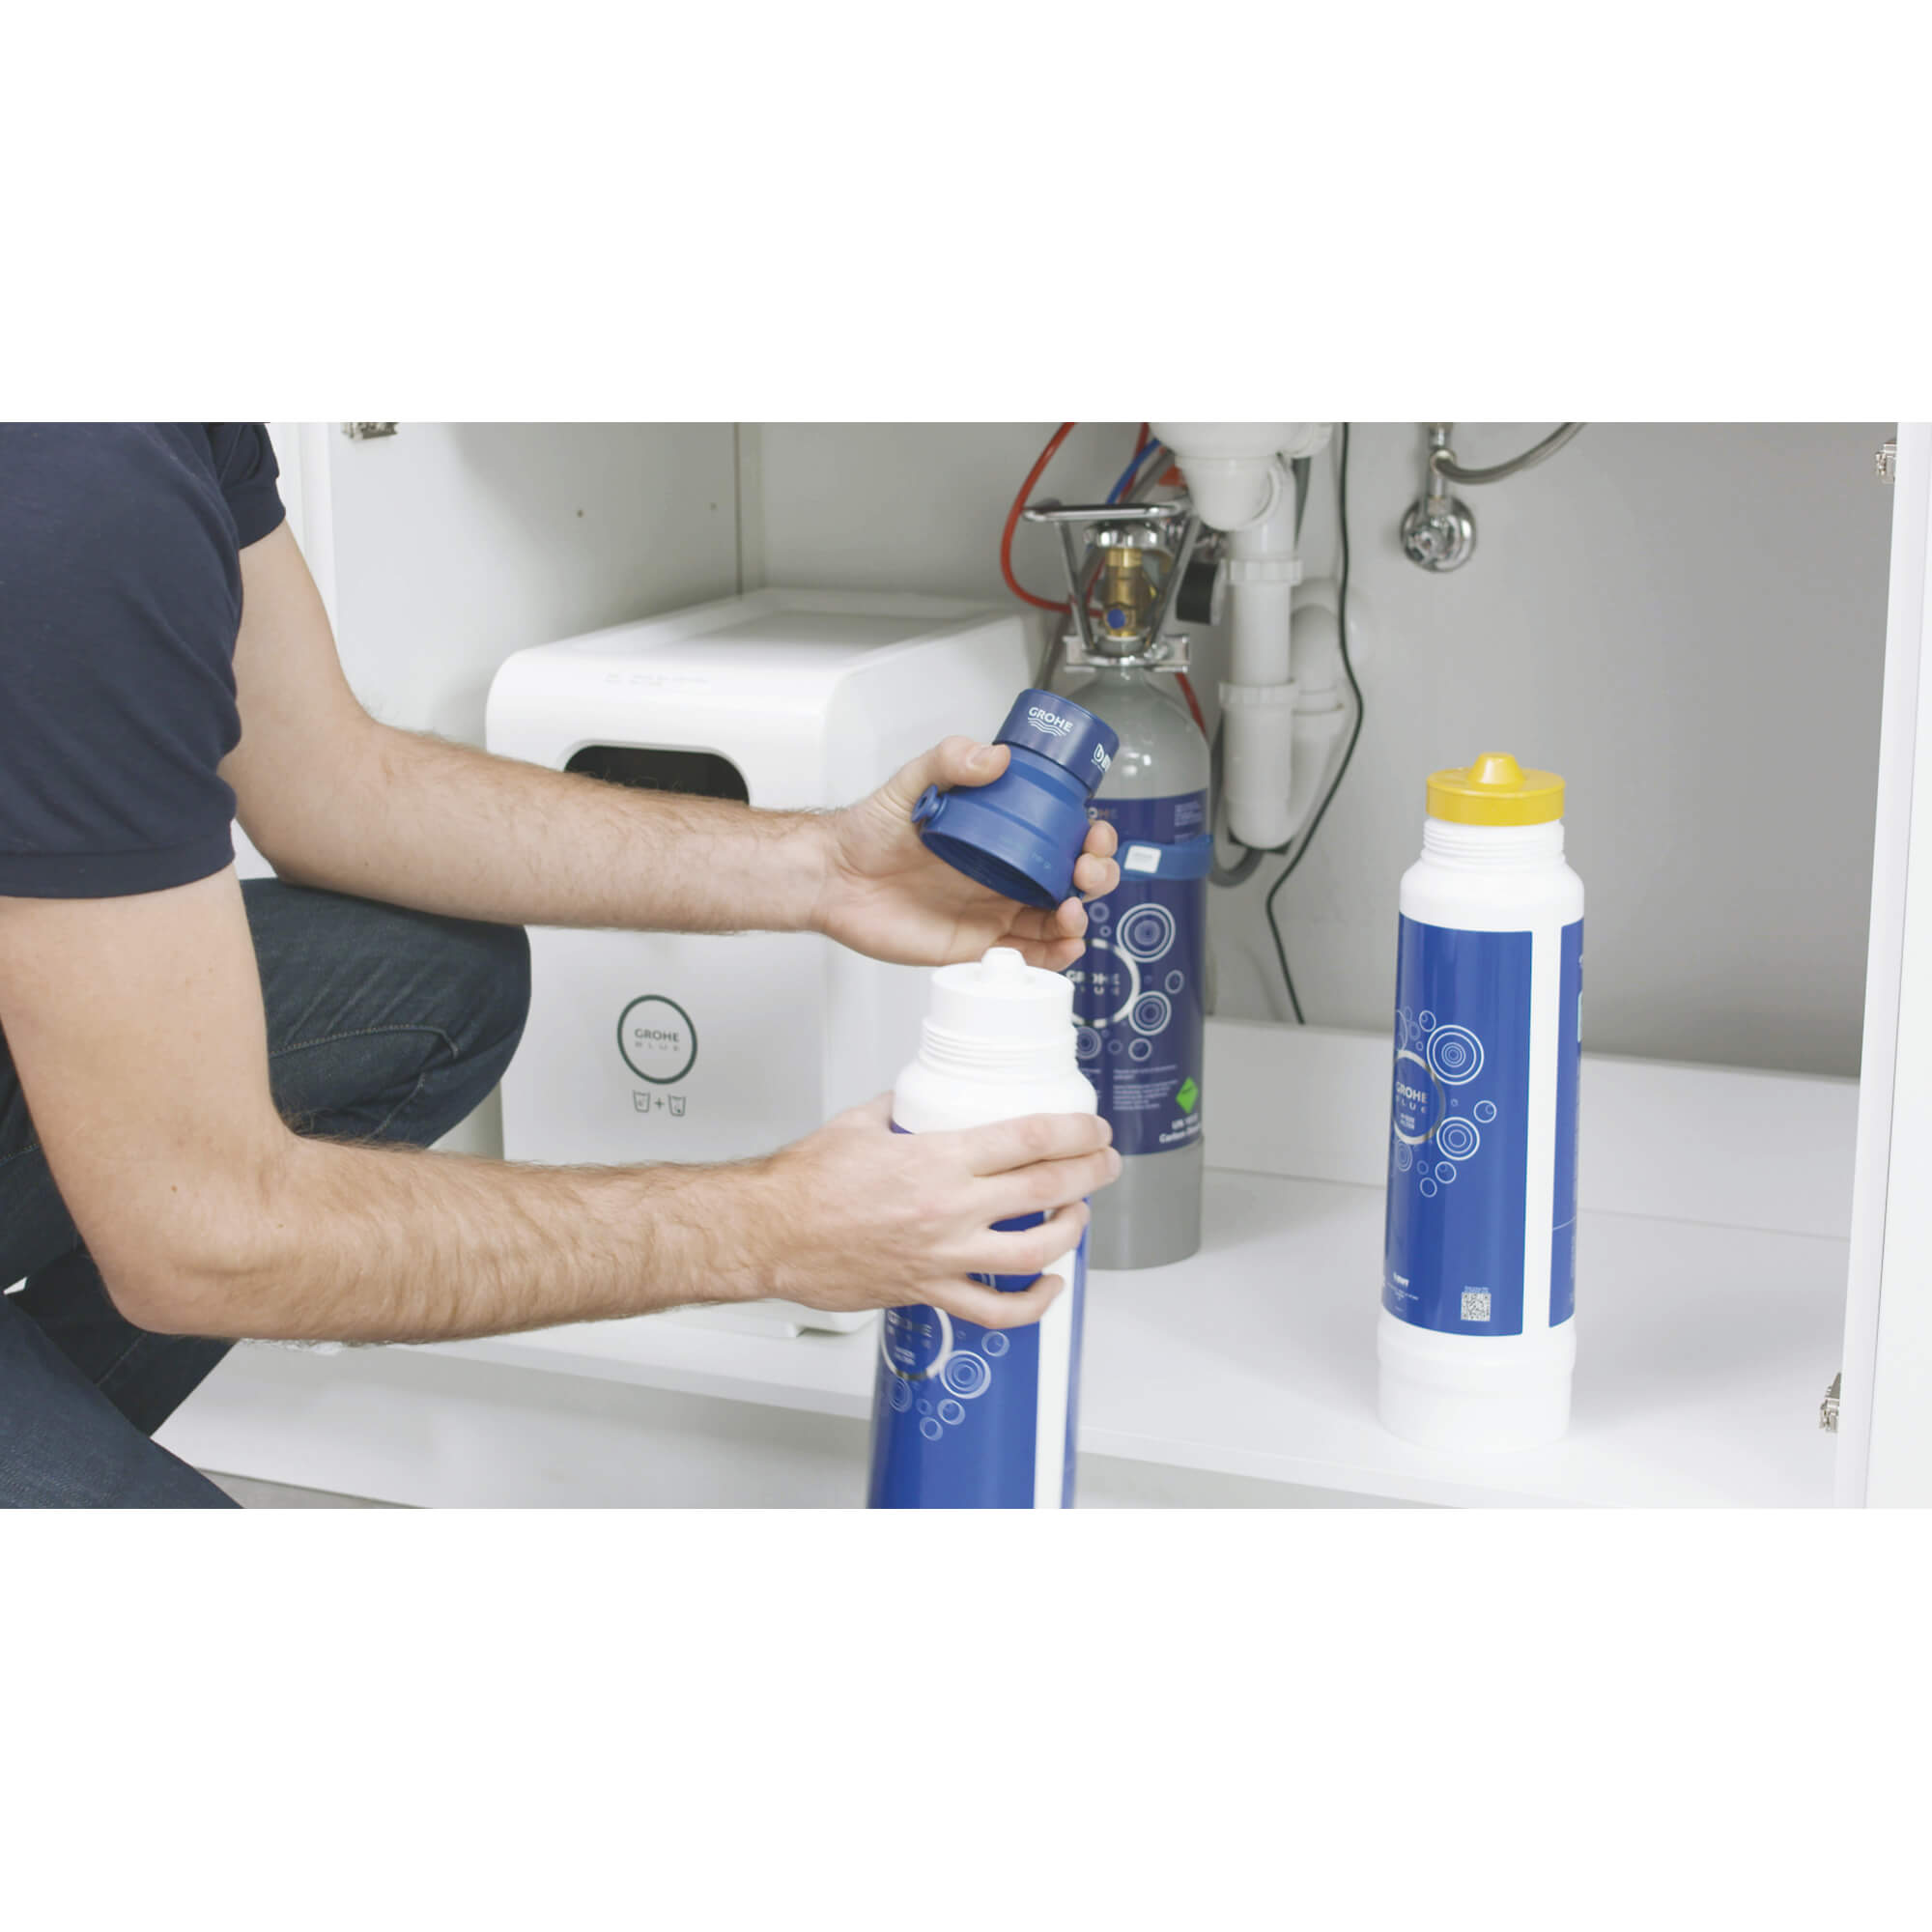 GROHE Blue® Carbon Filter, S-Size